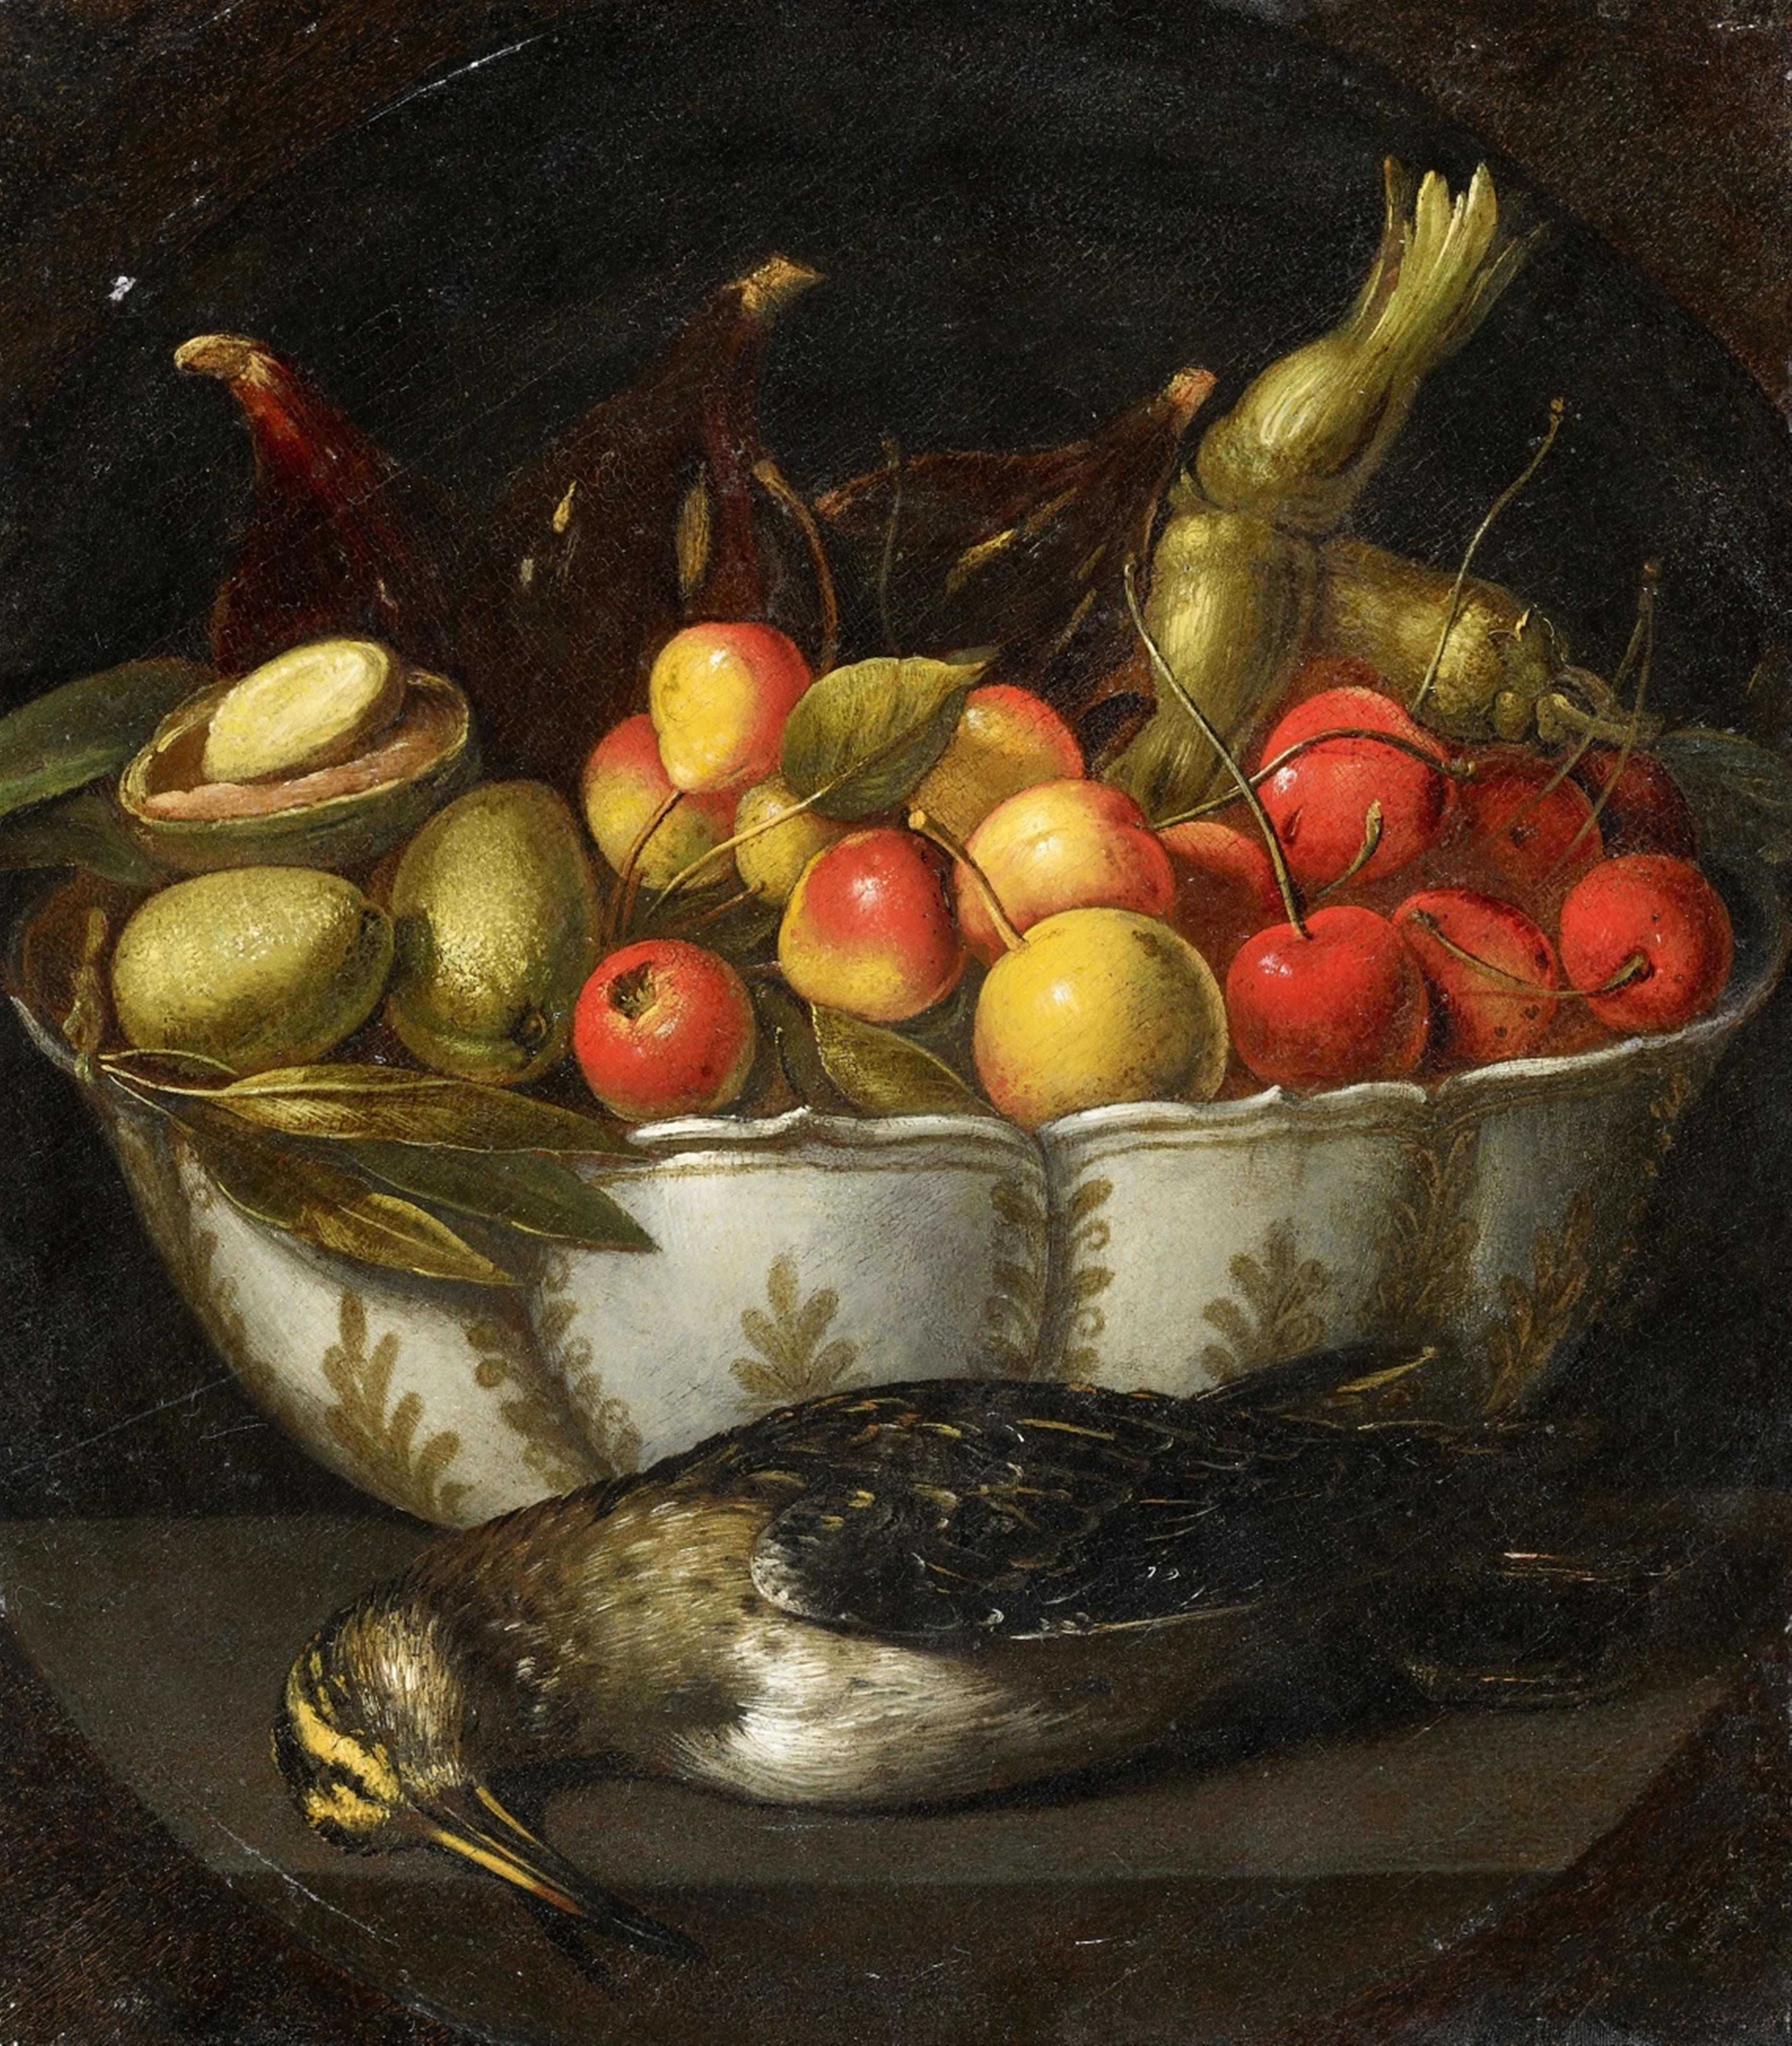 Francesco Codino, attributed to - Still Life with Fruit, Nuts, and a Throttle - image-1